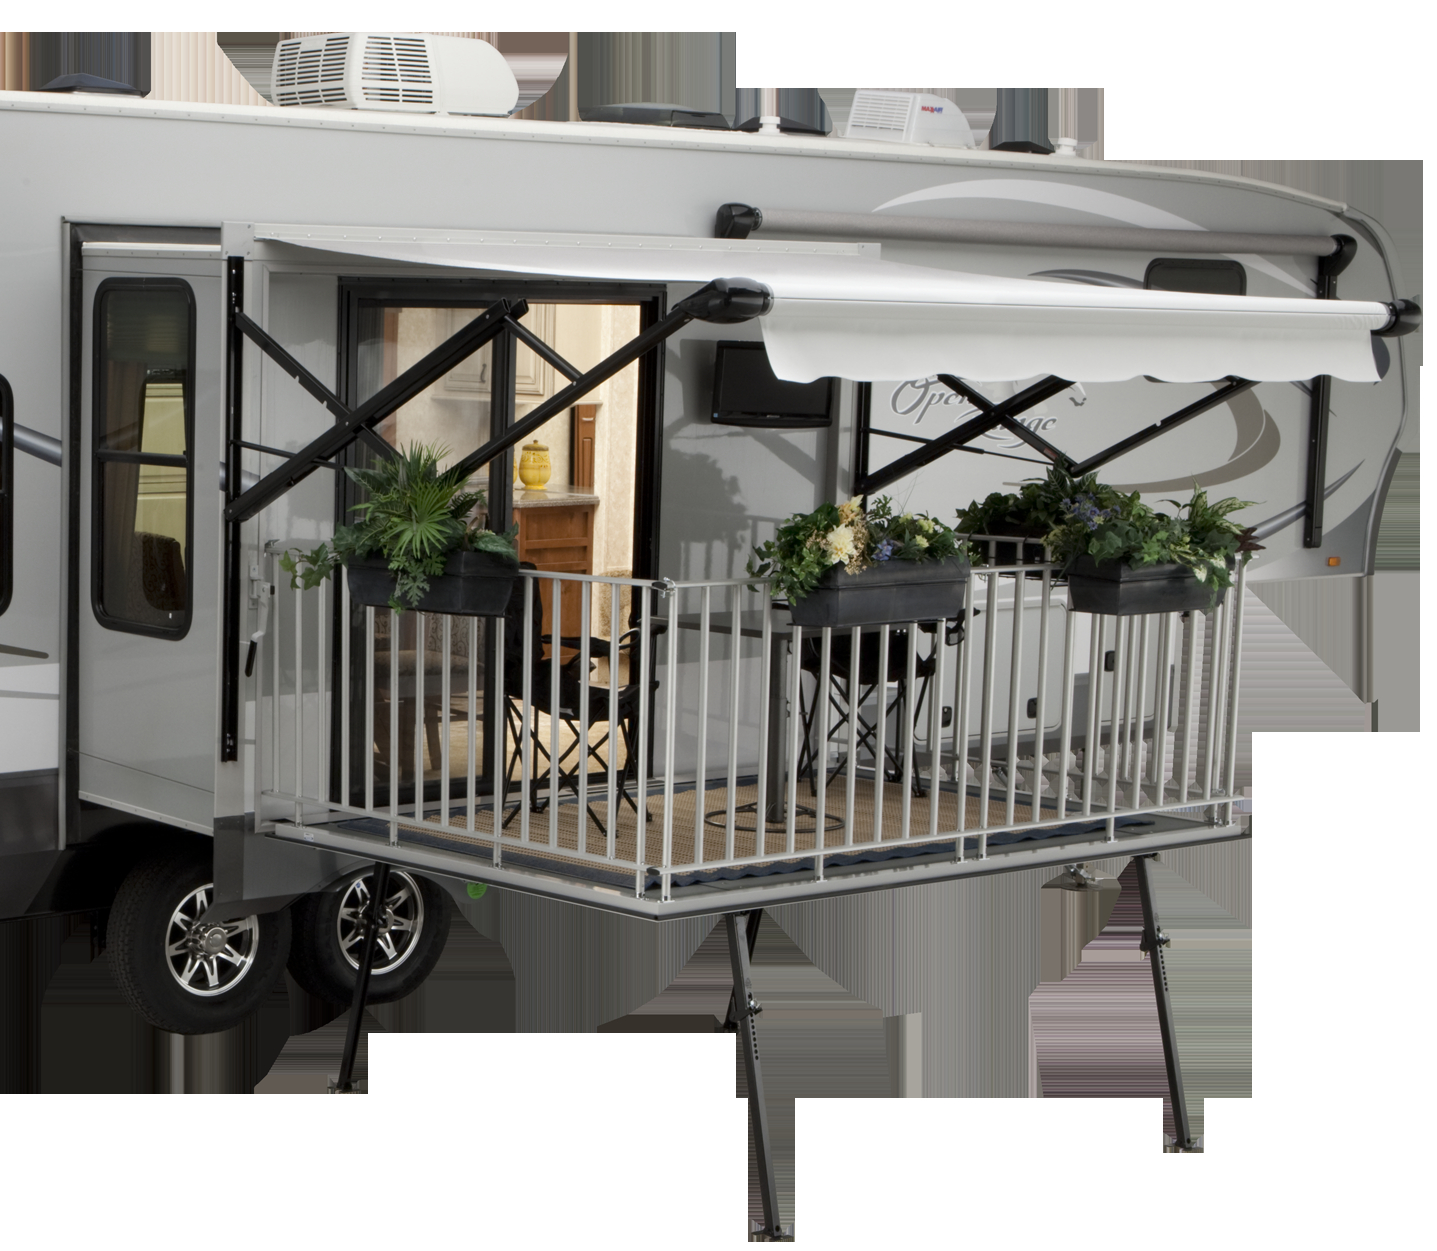 Wow Open Range Rv Company The Patio And Patio Awning Is intended for proportions 1437 X 1251